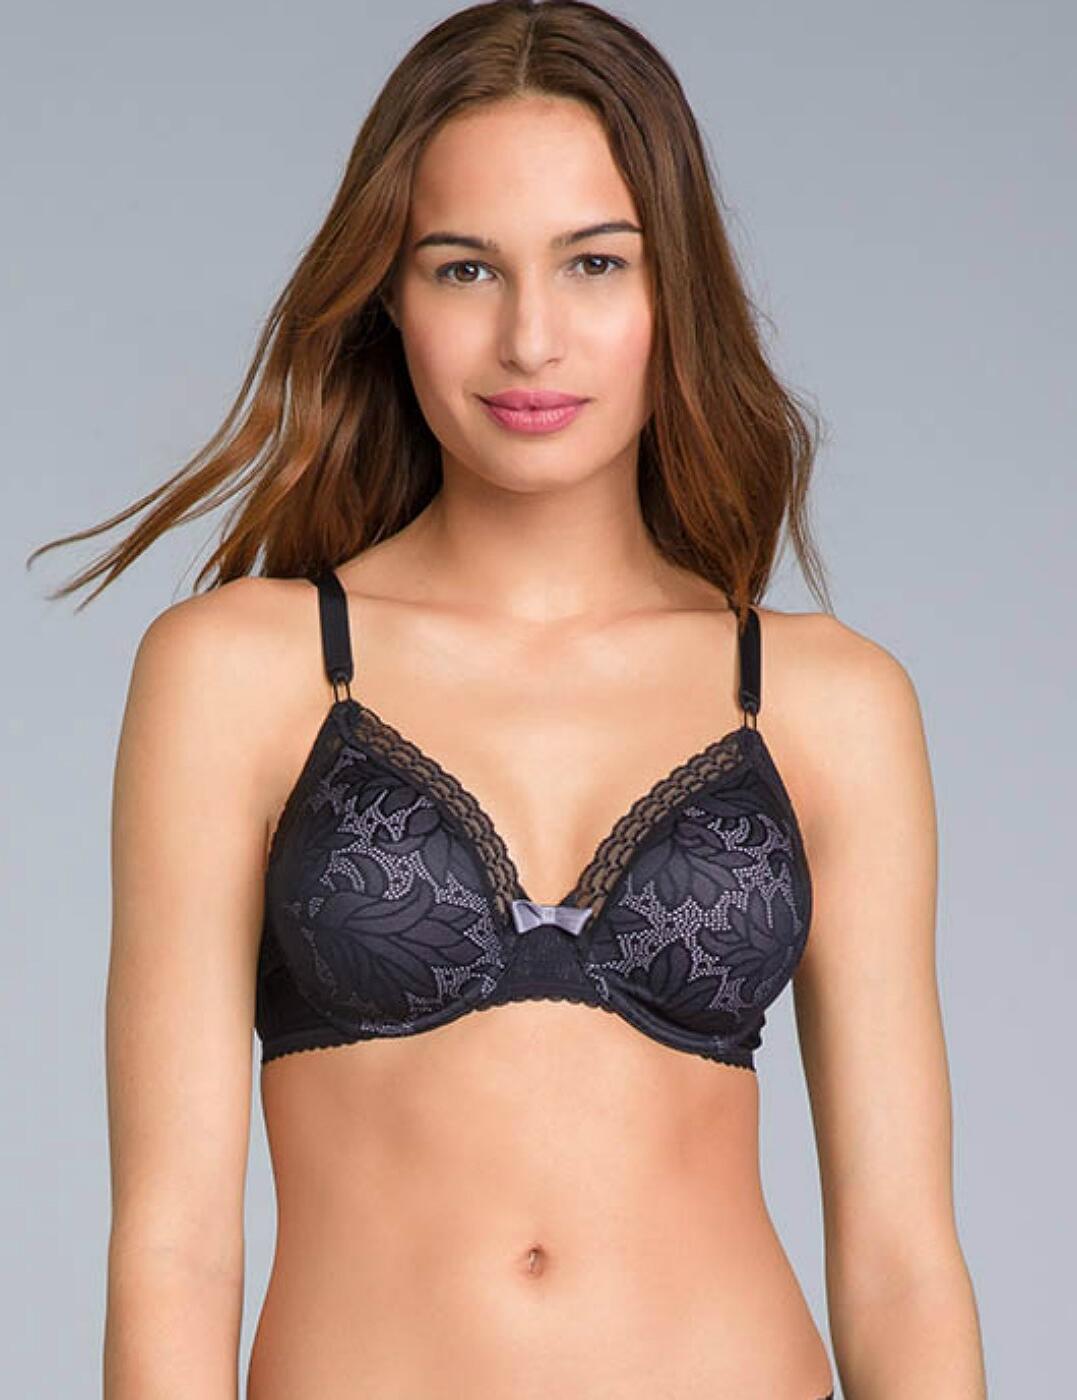 P07I3 Playtex Invisible Elegance Underwired Full Cup Bra - P07I3 Black